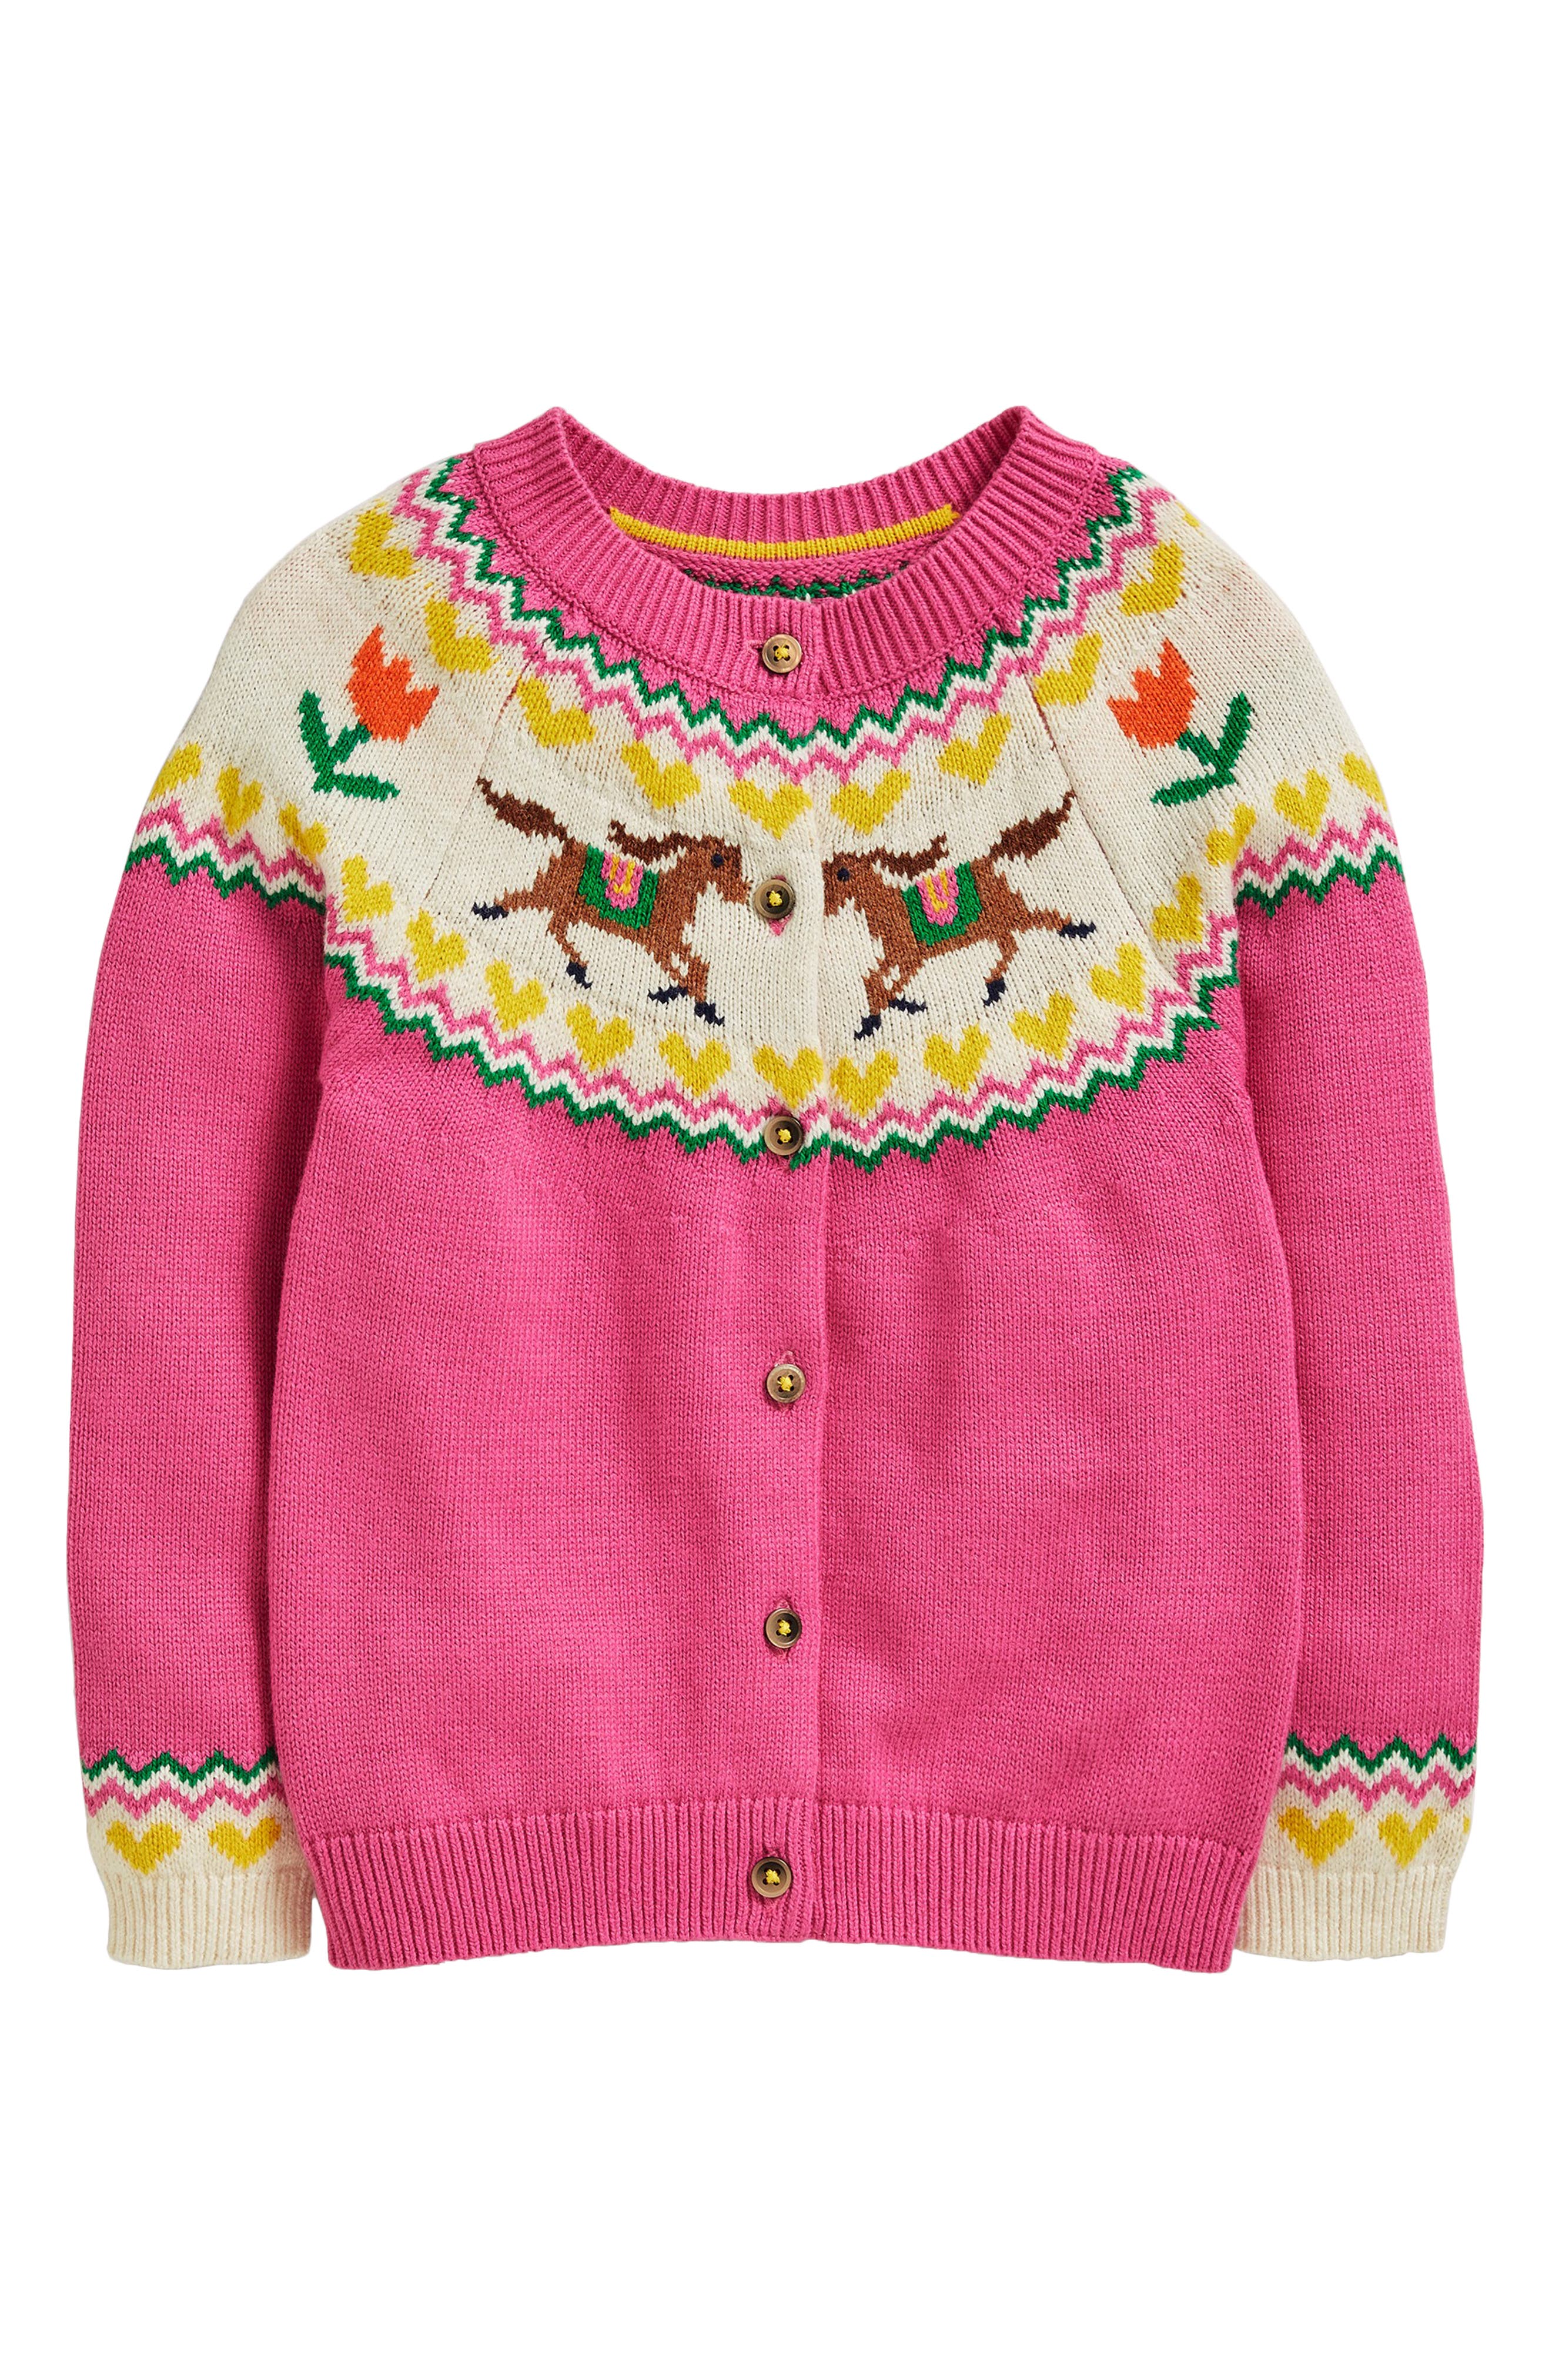 QQBBGL Girls Spring Sweaters Little Kids Pullover Sweaters Baby Children Casual Clothes 